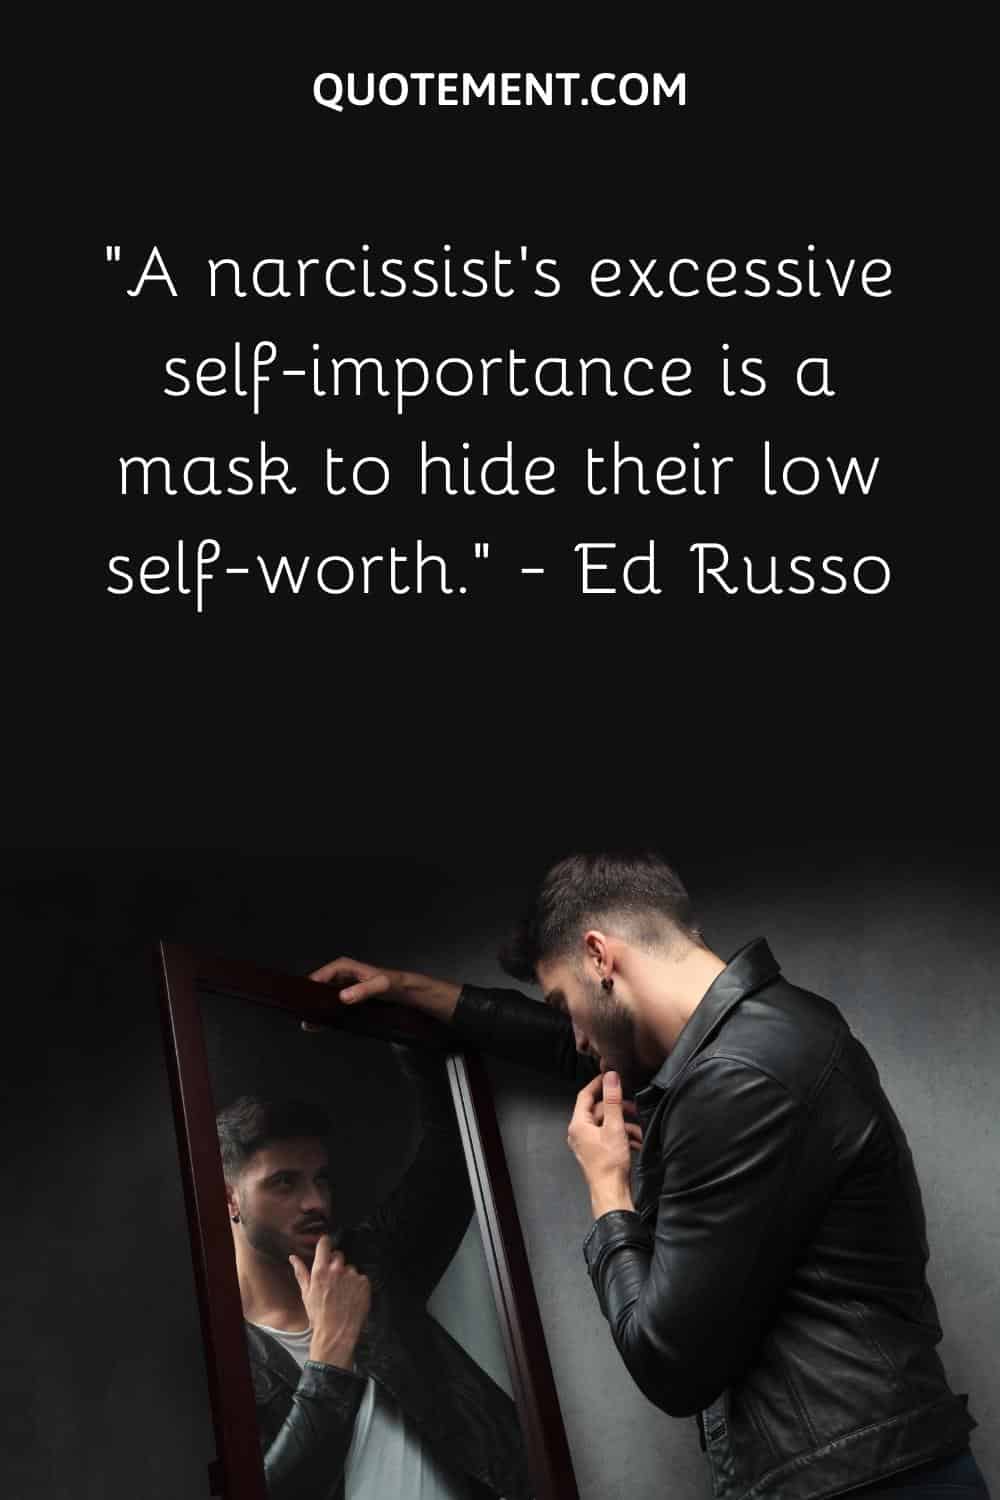 A narcissist's excessive self-importance is a mask to hide their low self-worth